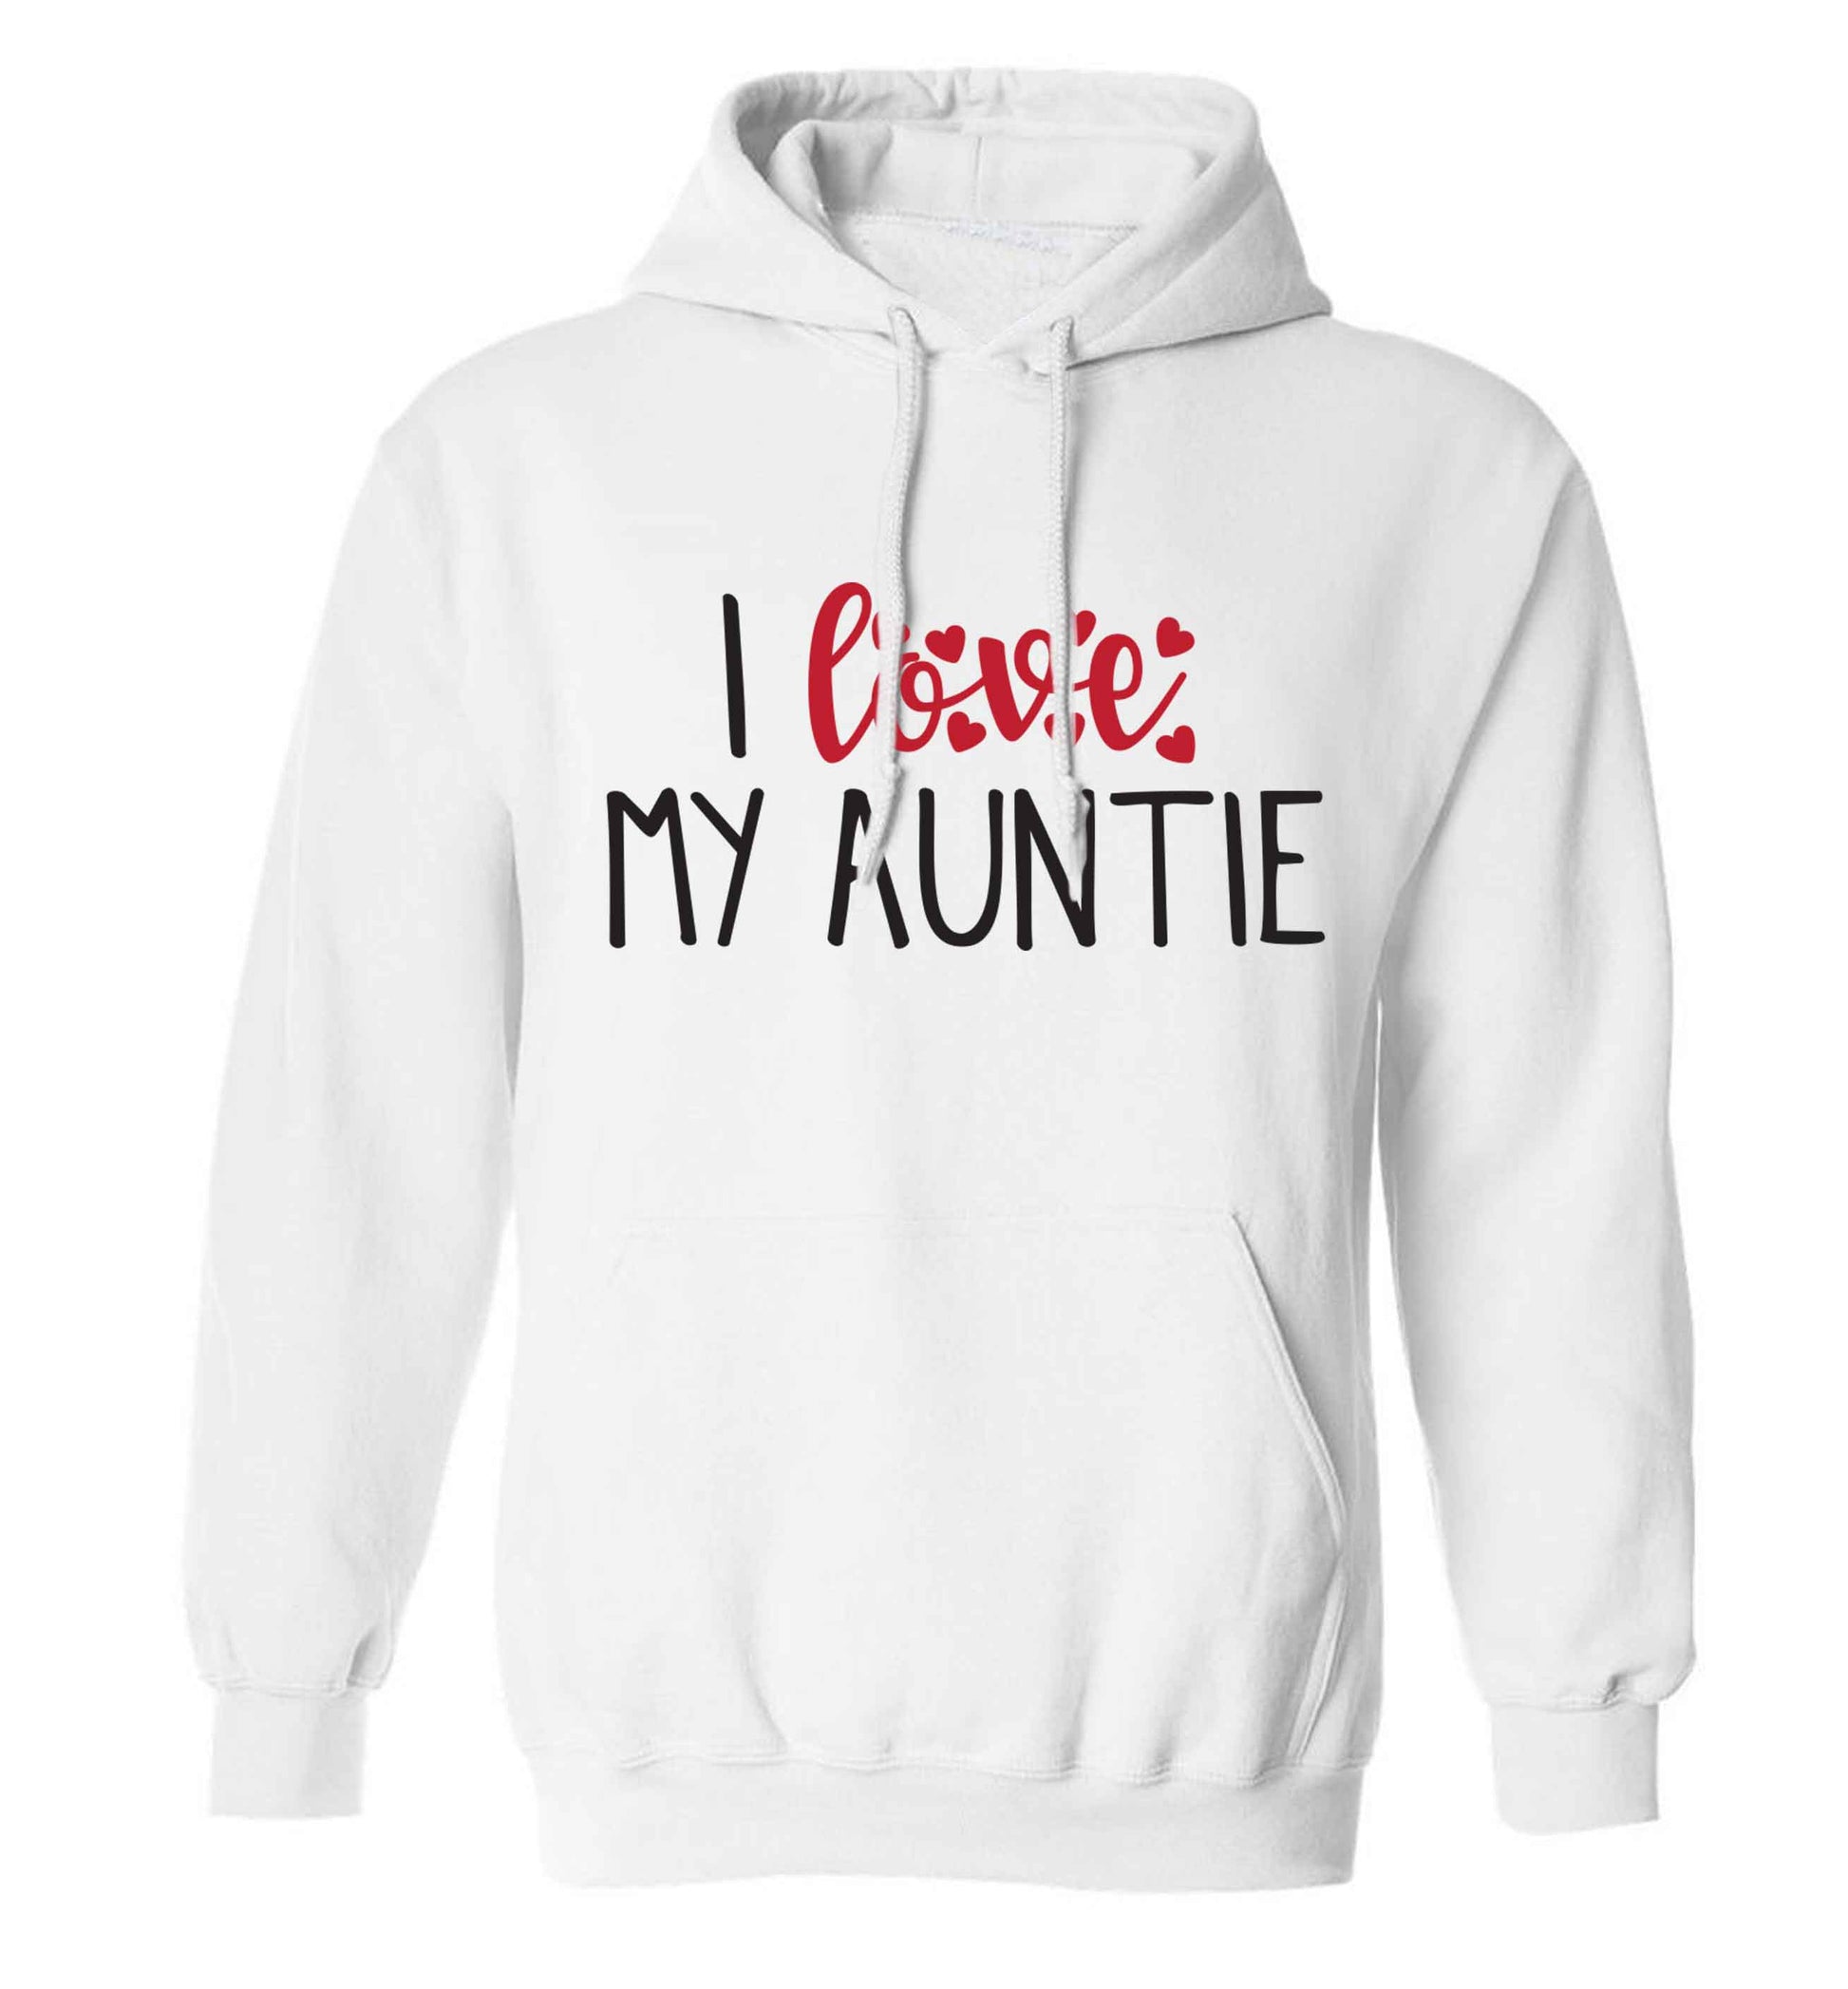 I love my auntie adults unisex white hoodie 2XL